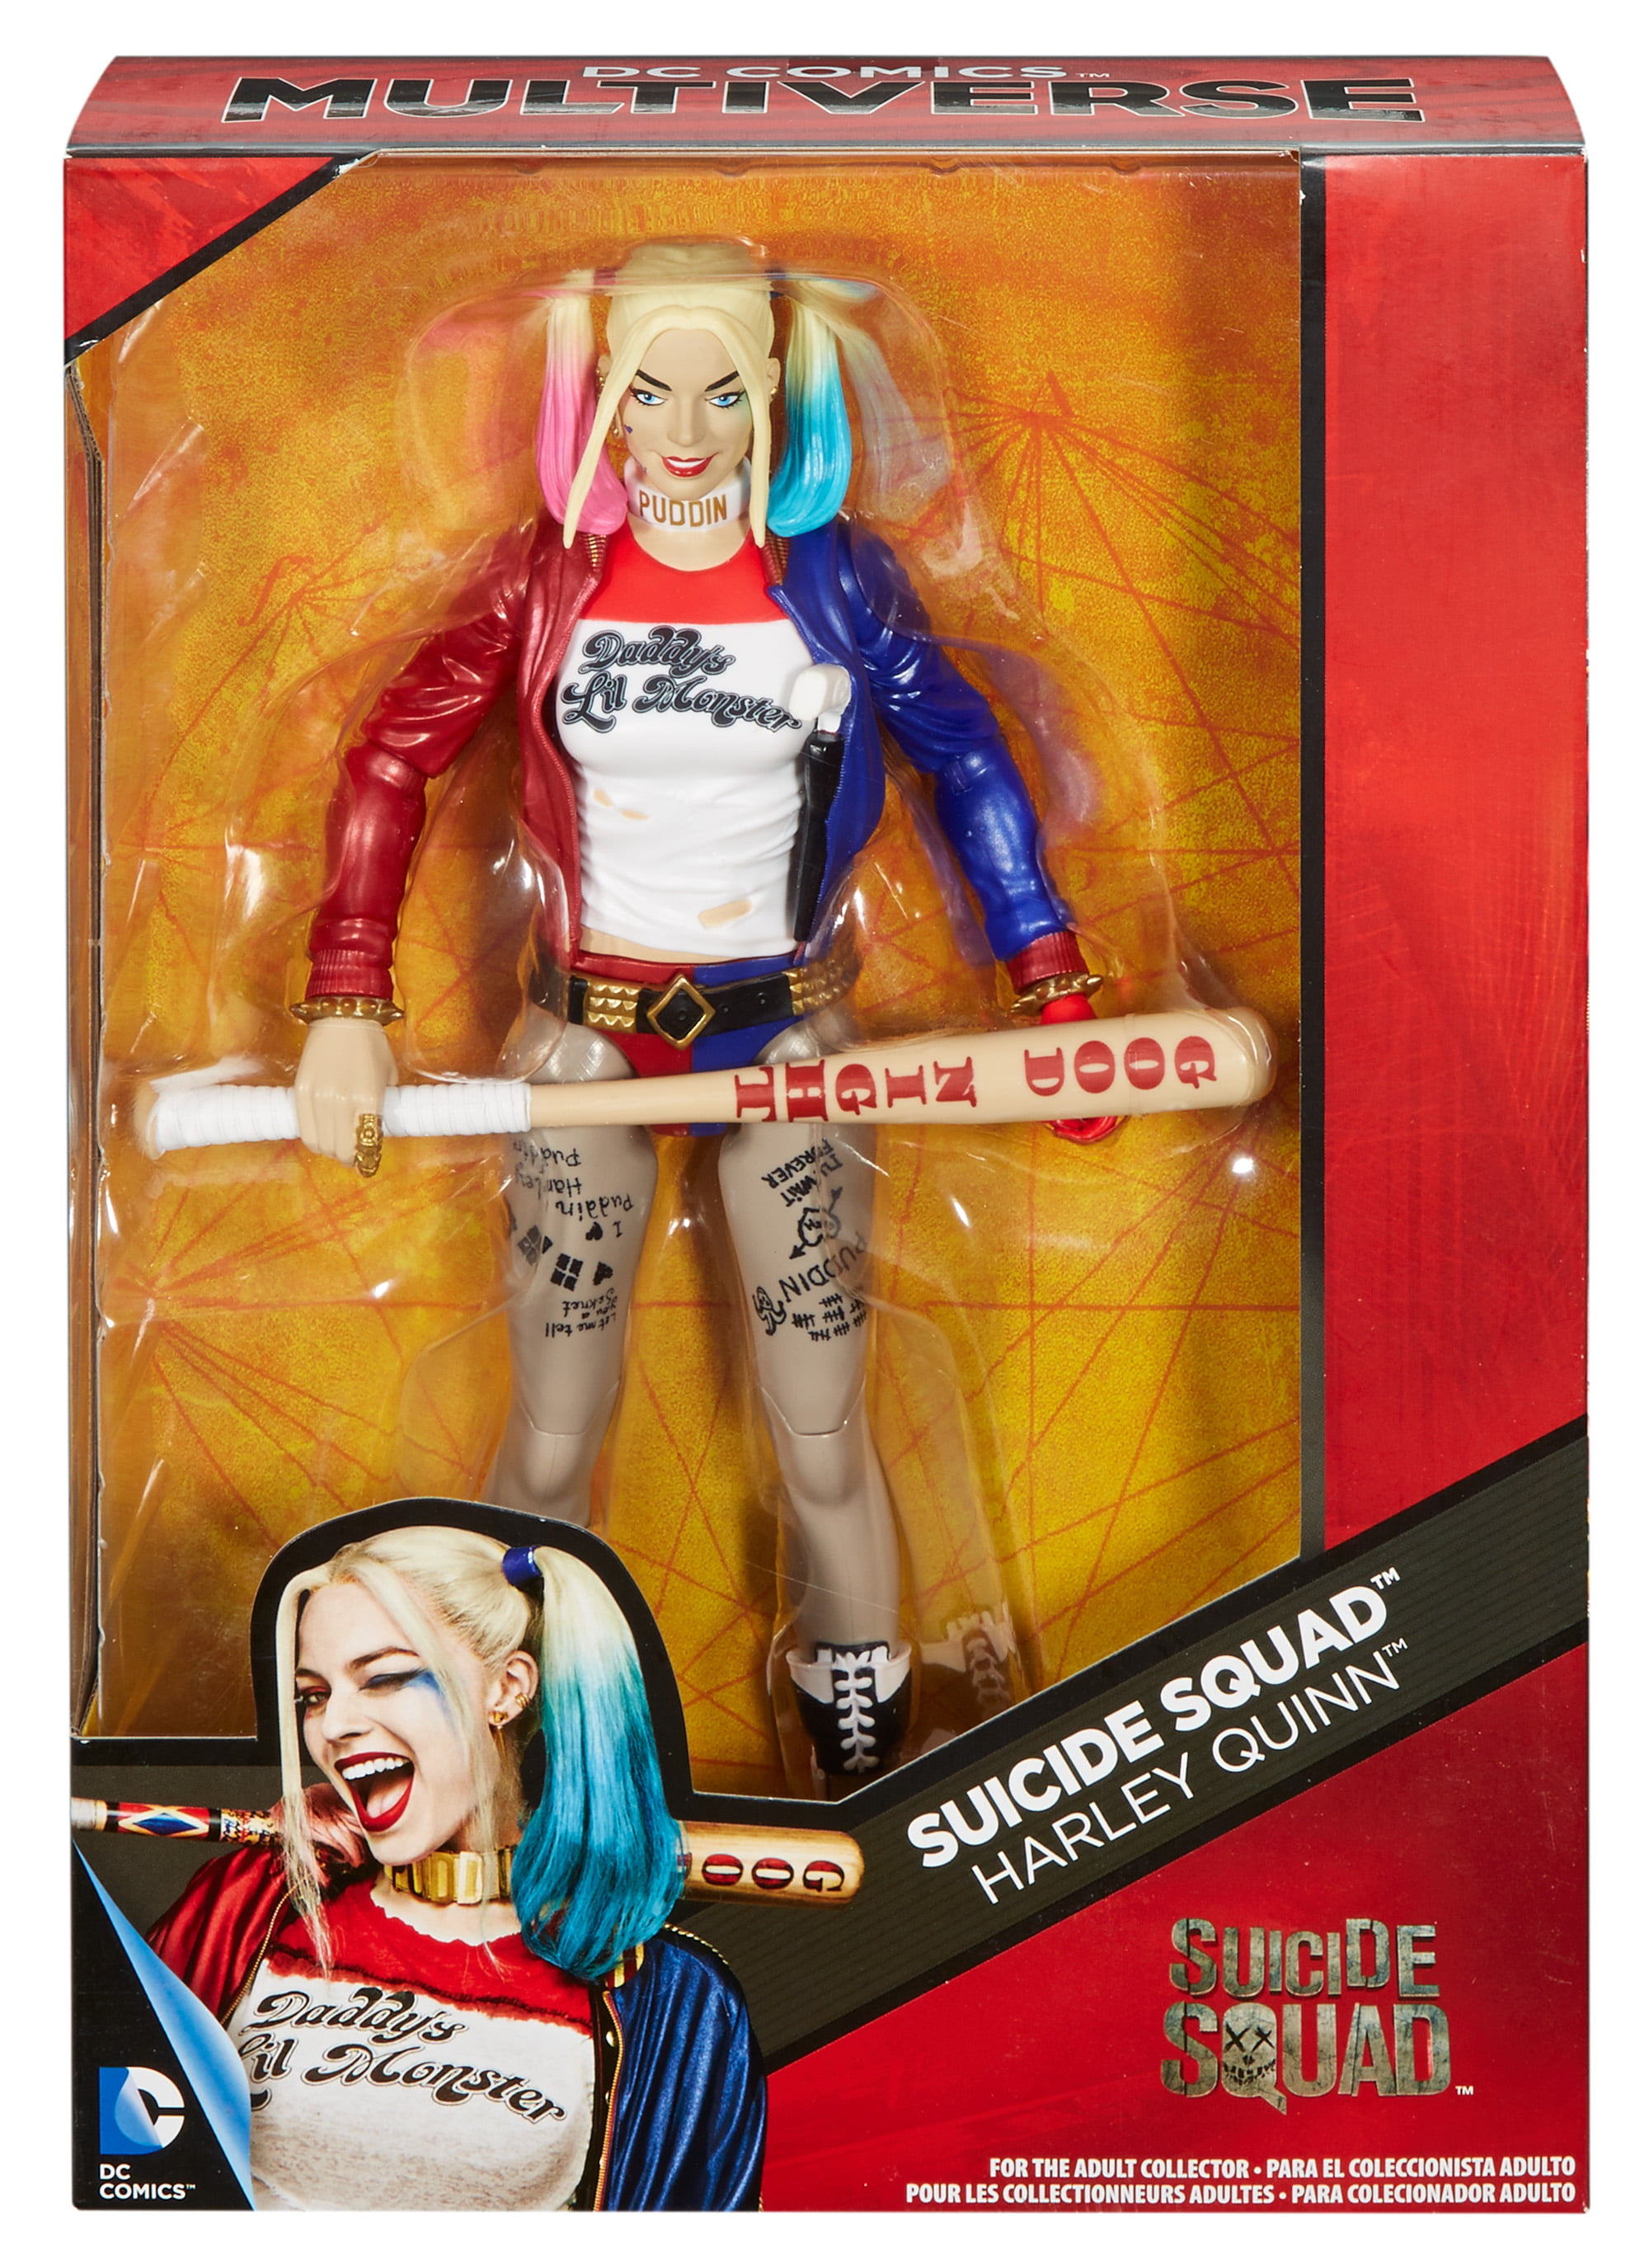 JADA 2.5" METAL SUICIDE SQUAD HARLEY QUINN BRIGHT COLORS ACTION FIGURE 84853-W1 